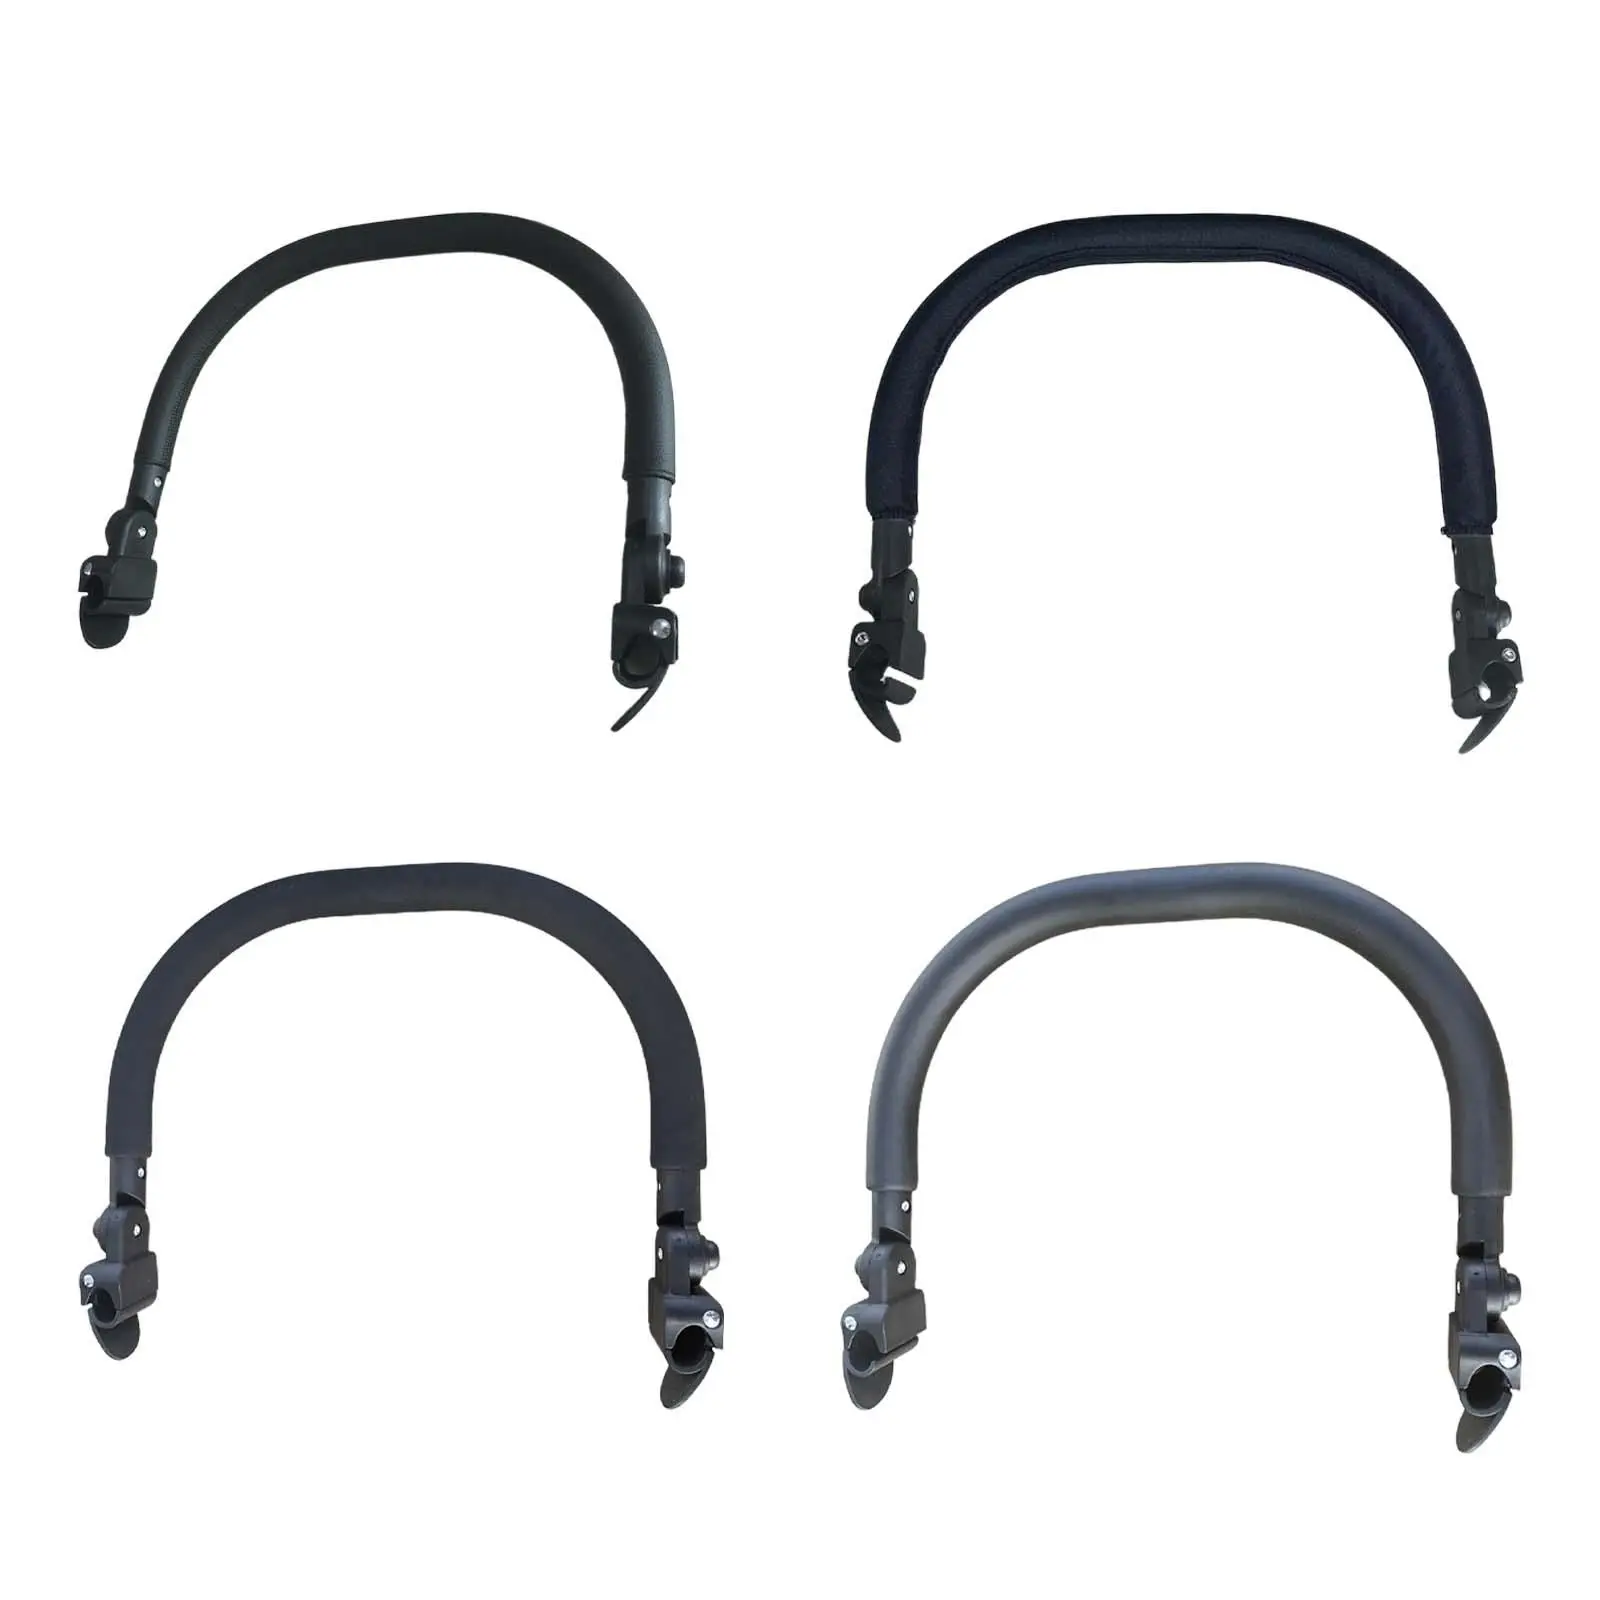 Pushchair Front Bars Adjustable Detachable Baby Stroller Armrest for Trolley Baby Carriages Pushchair Crossbar Accessories